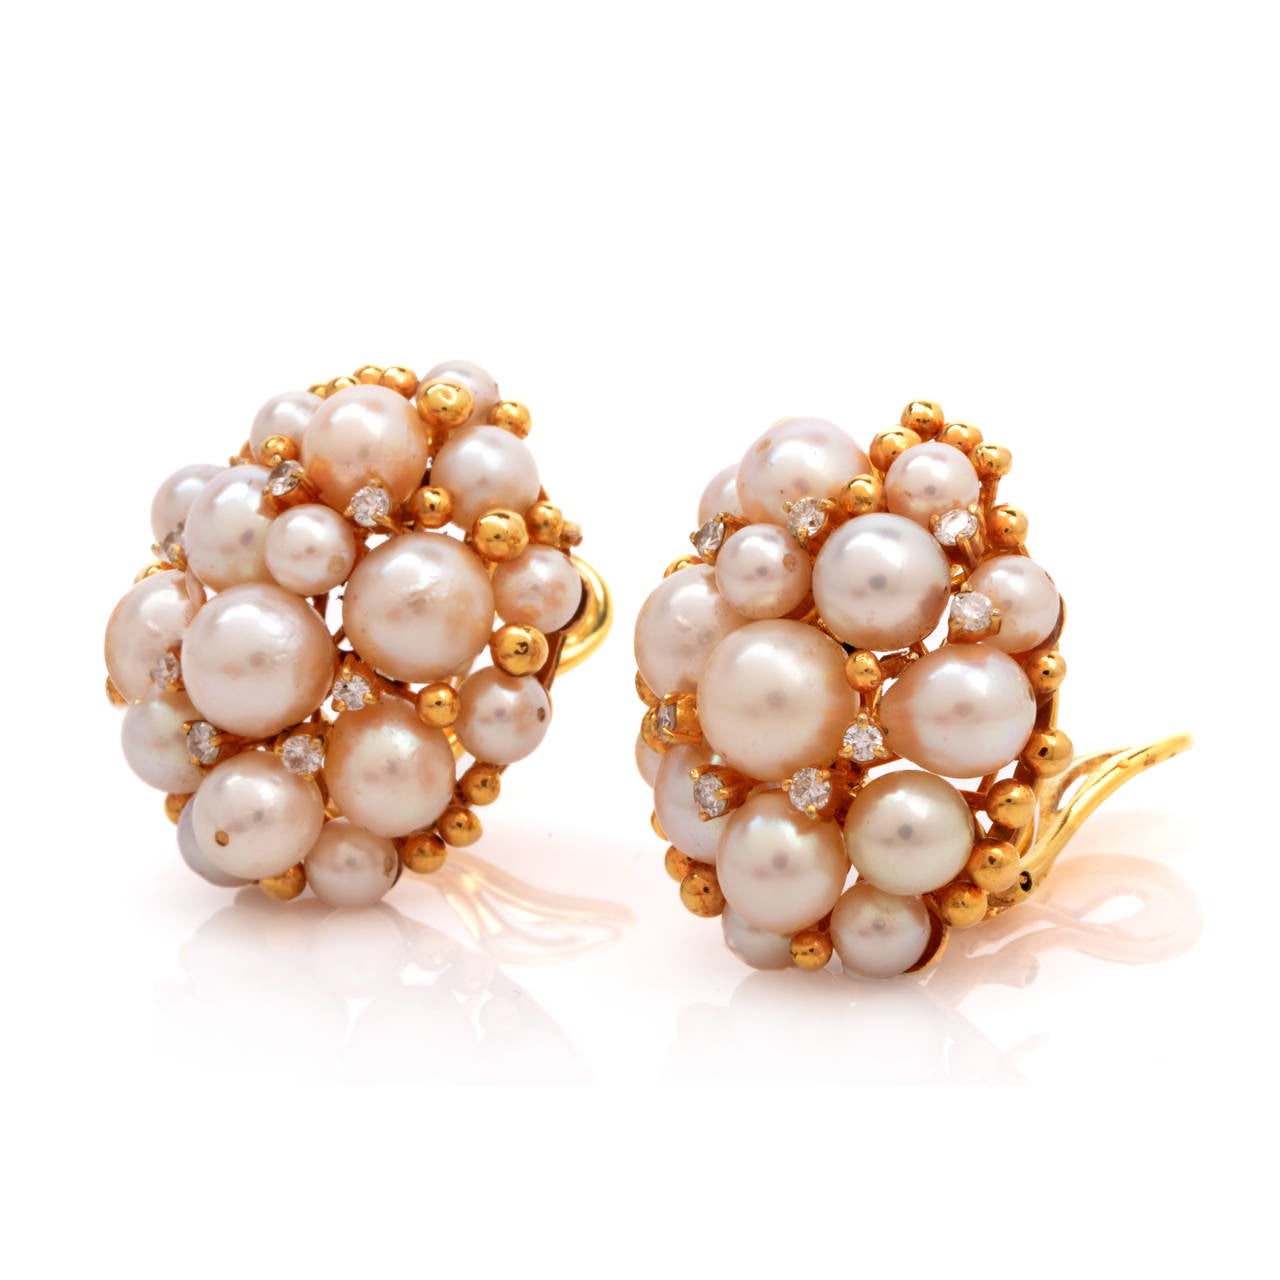 These earrings of captivating aesthetic, reminiscent of the opulent Retro earrings, are crafted in solid 18K yellow gold.  Incorporating clusters of graduated pearls mounted atop a pair of ornate, ovular plaques, these alluring earrings are adorned